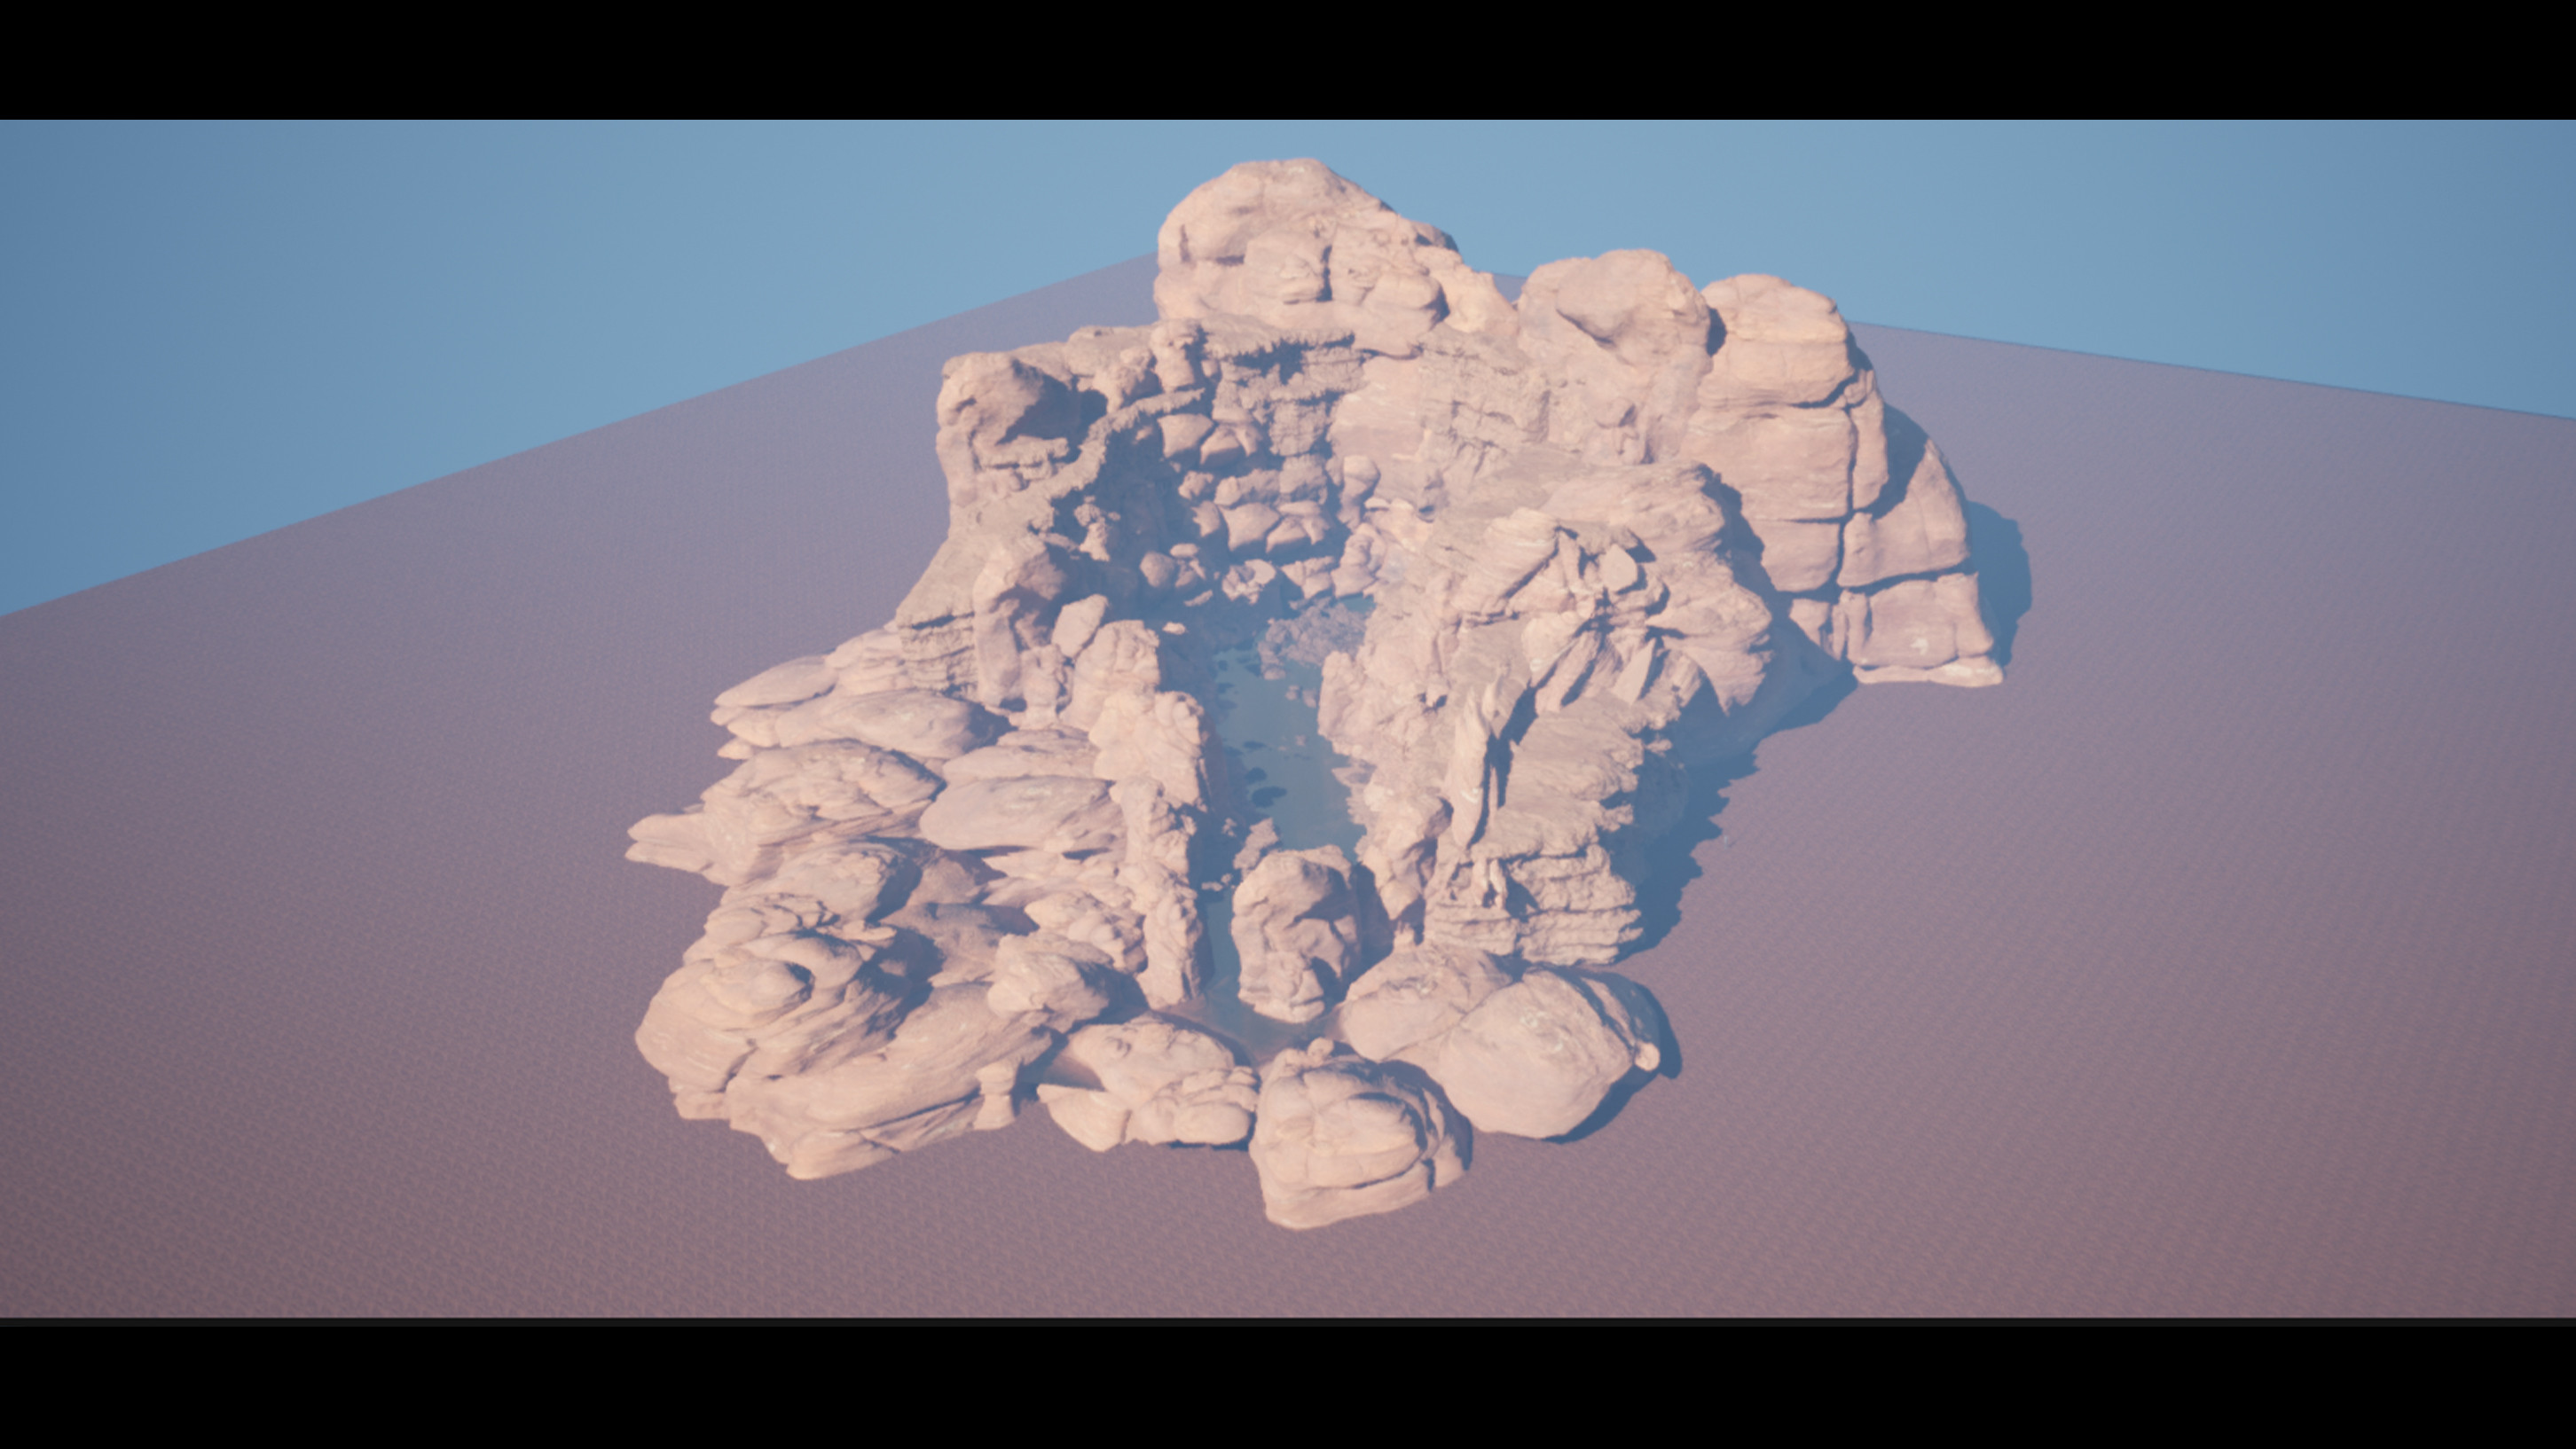 Using massive scale assets we then start to block out the bulk of the scene.